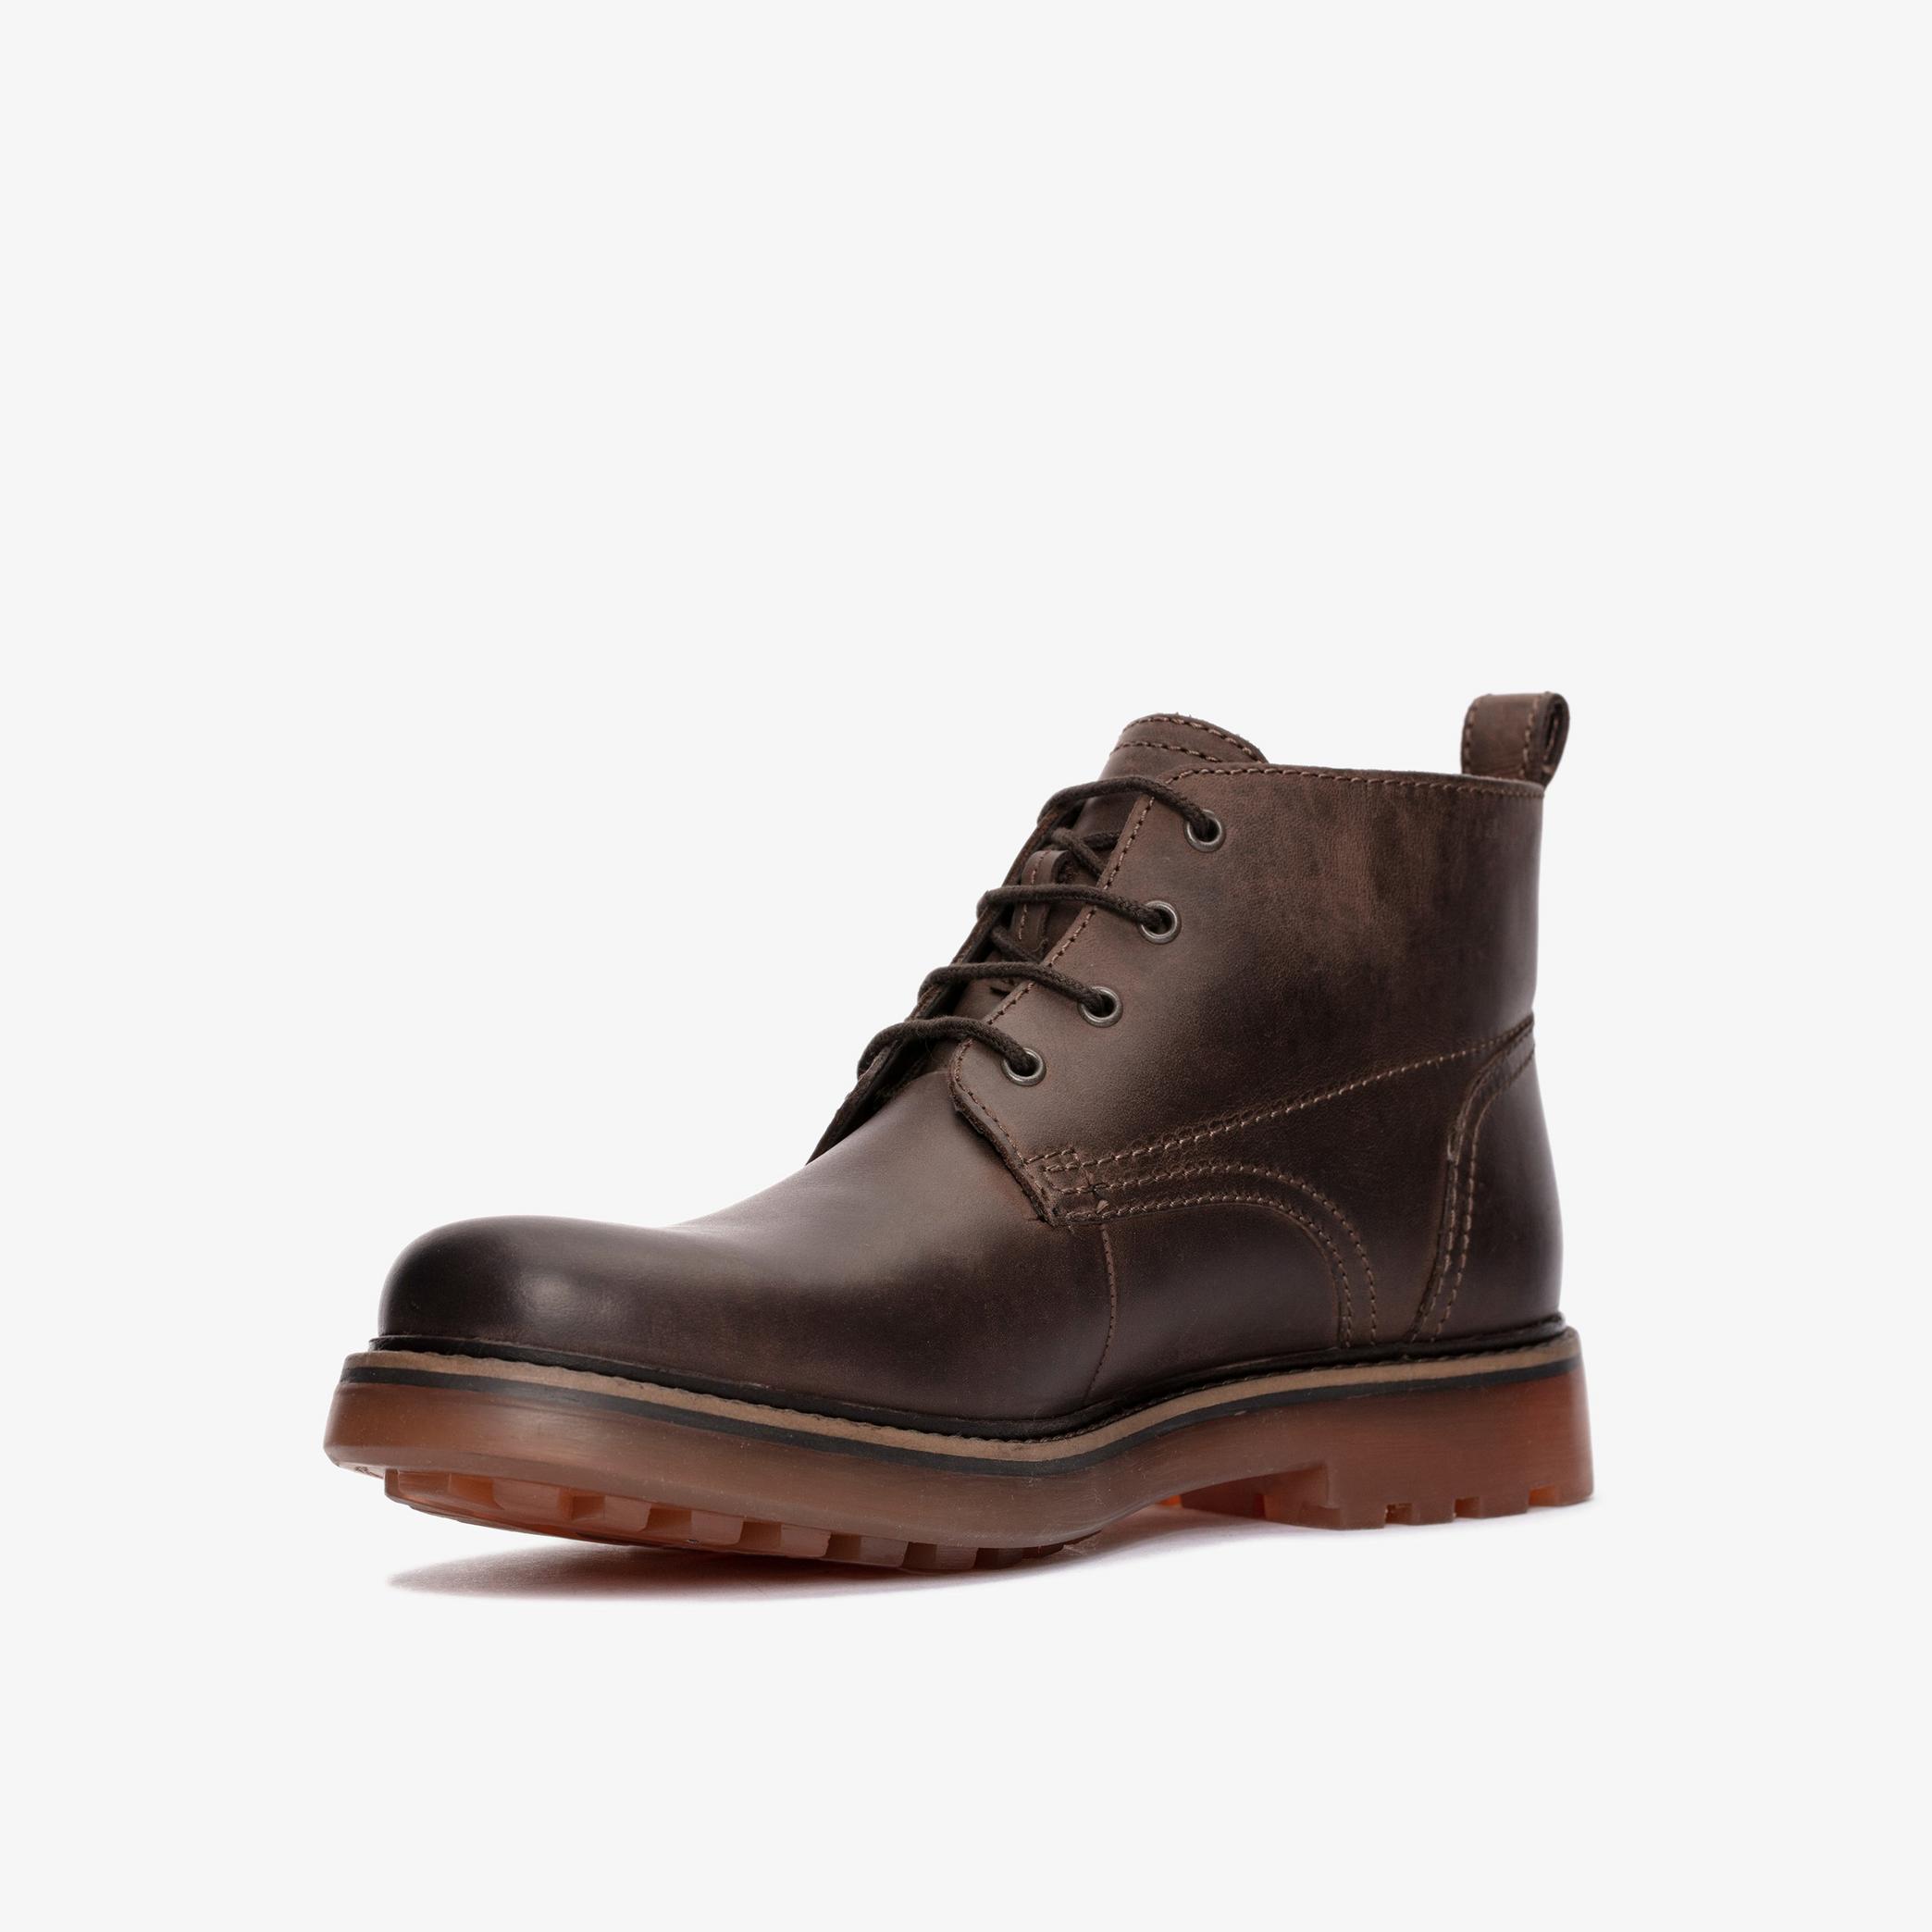 Chard Mid Dark Brown Leather Ankle Boots, view 4 of 6